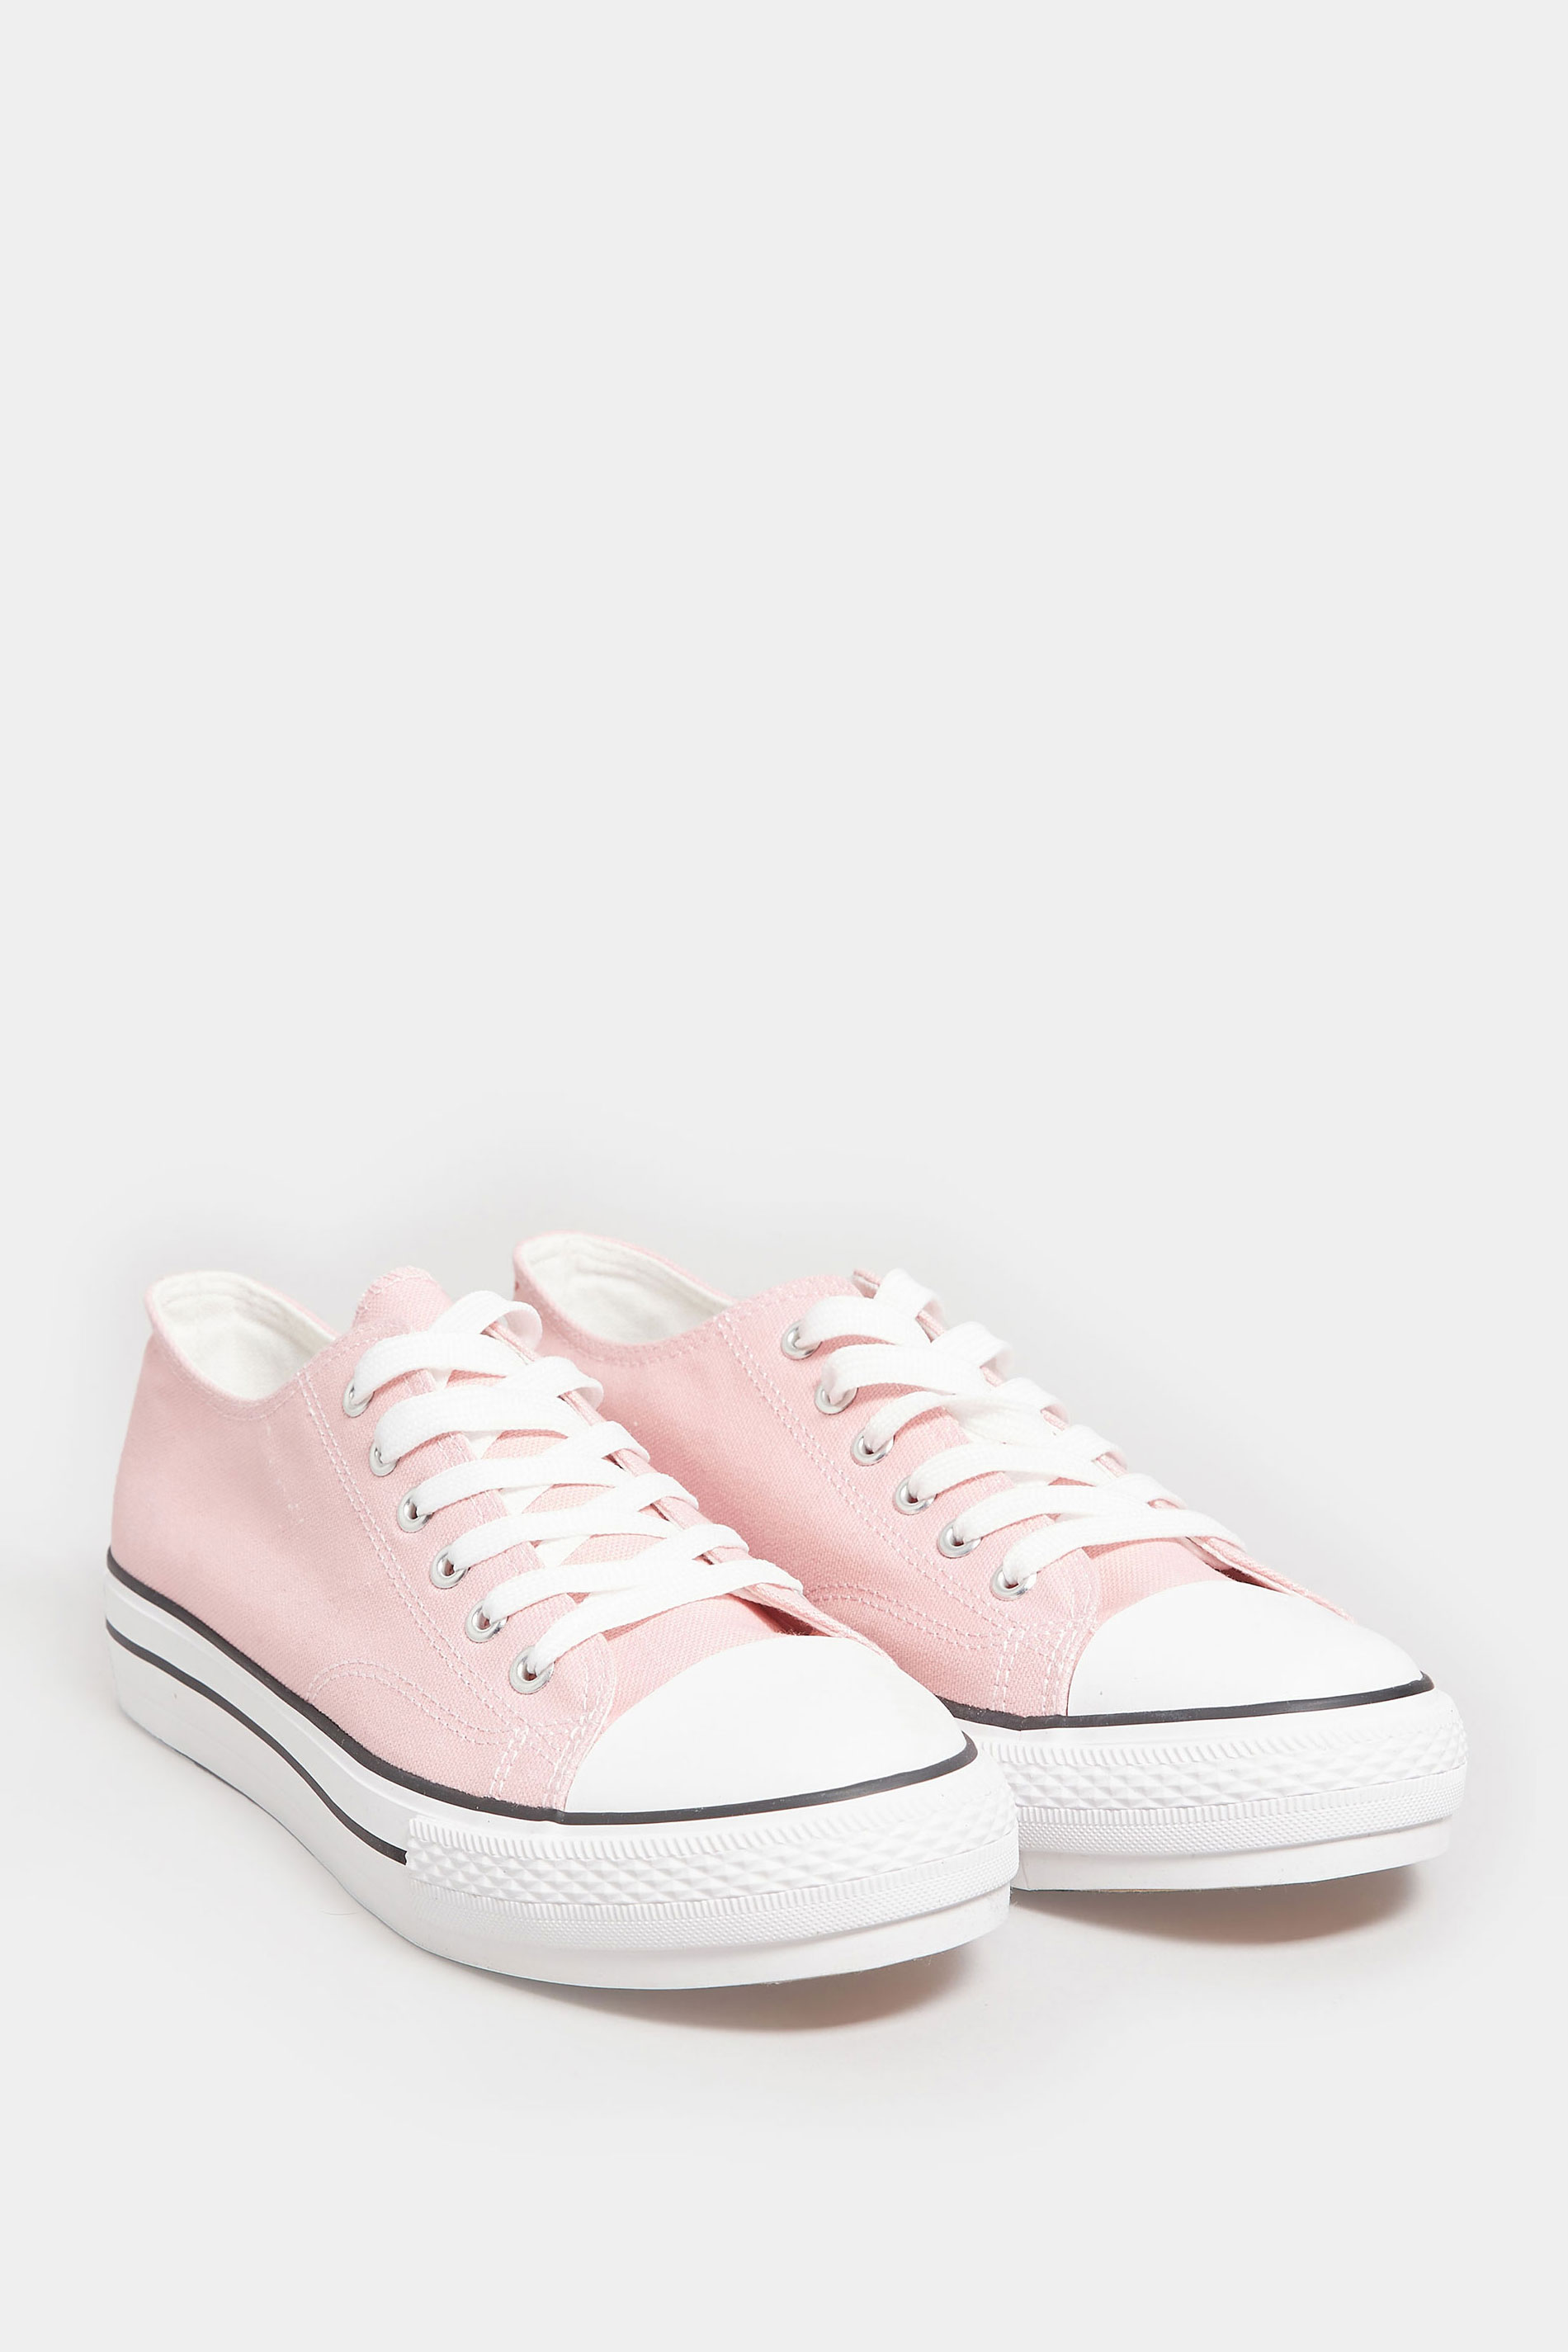 Light Pink Canvas Platform Sole Low Trainers In Wide E Fit | Yours Clothing  2